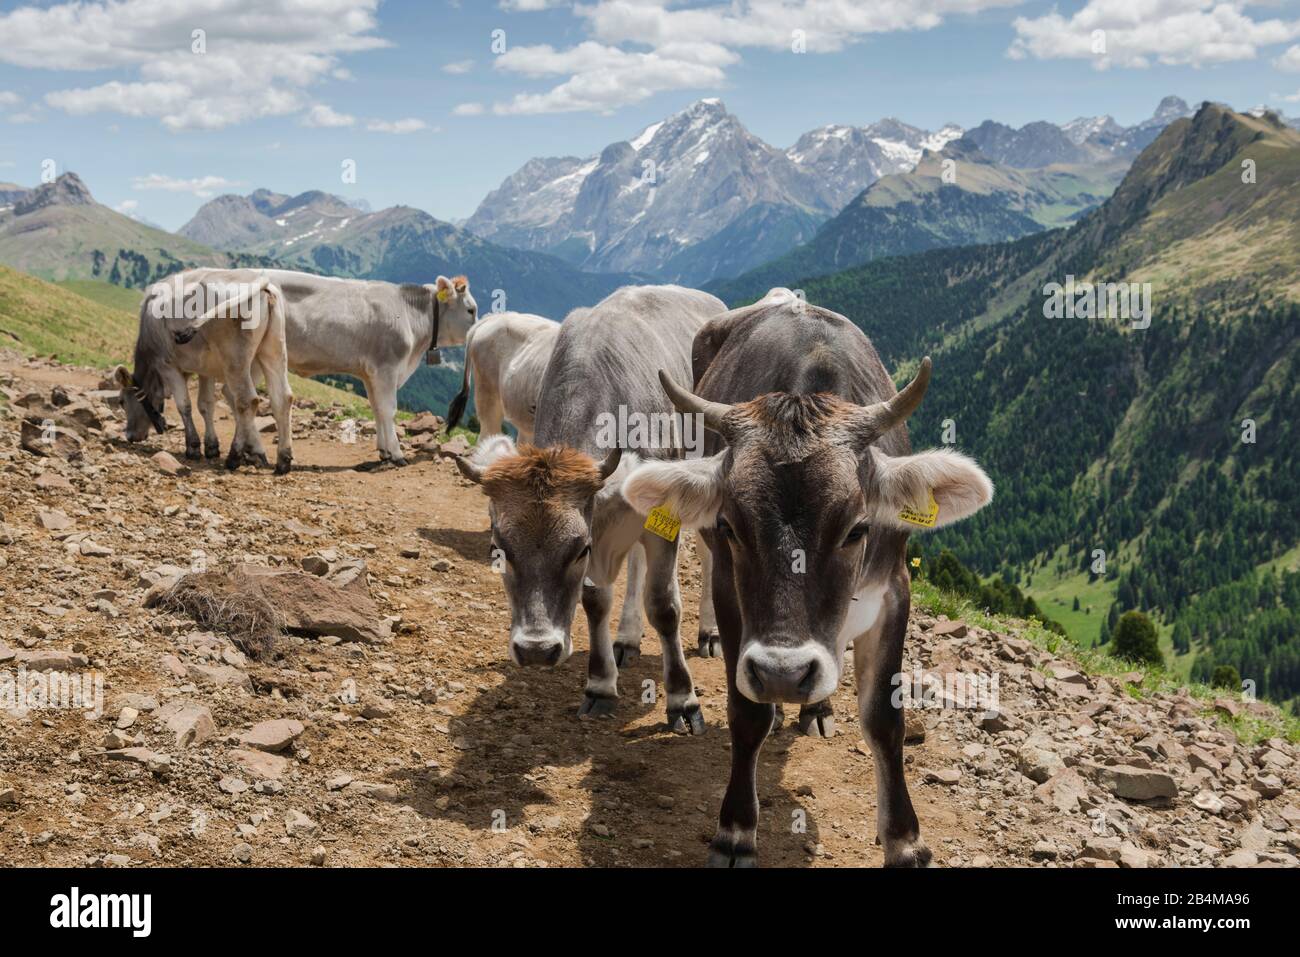 Italy, South Tyrol, Dolomites, Seiser Alm, cattle herd on Friedrich-August-Weg with Marmolada in the background Stock Photo